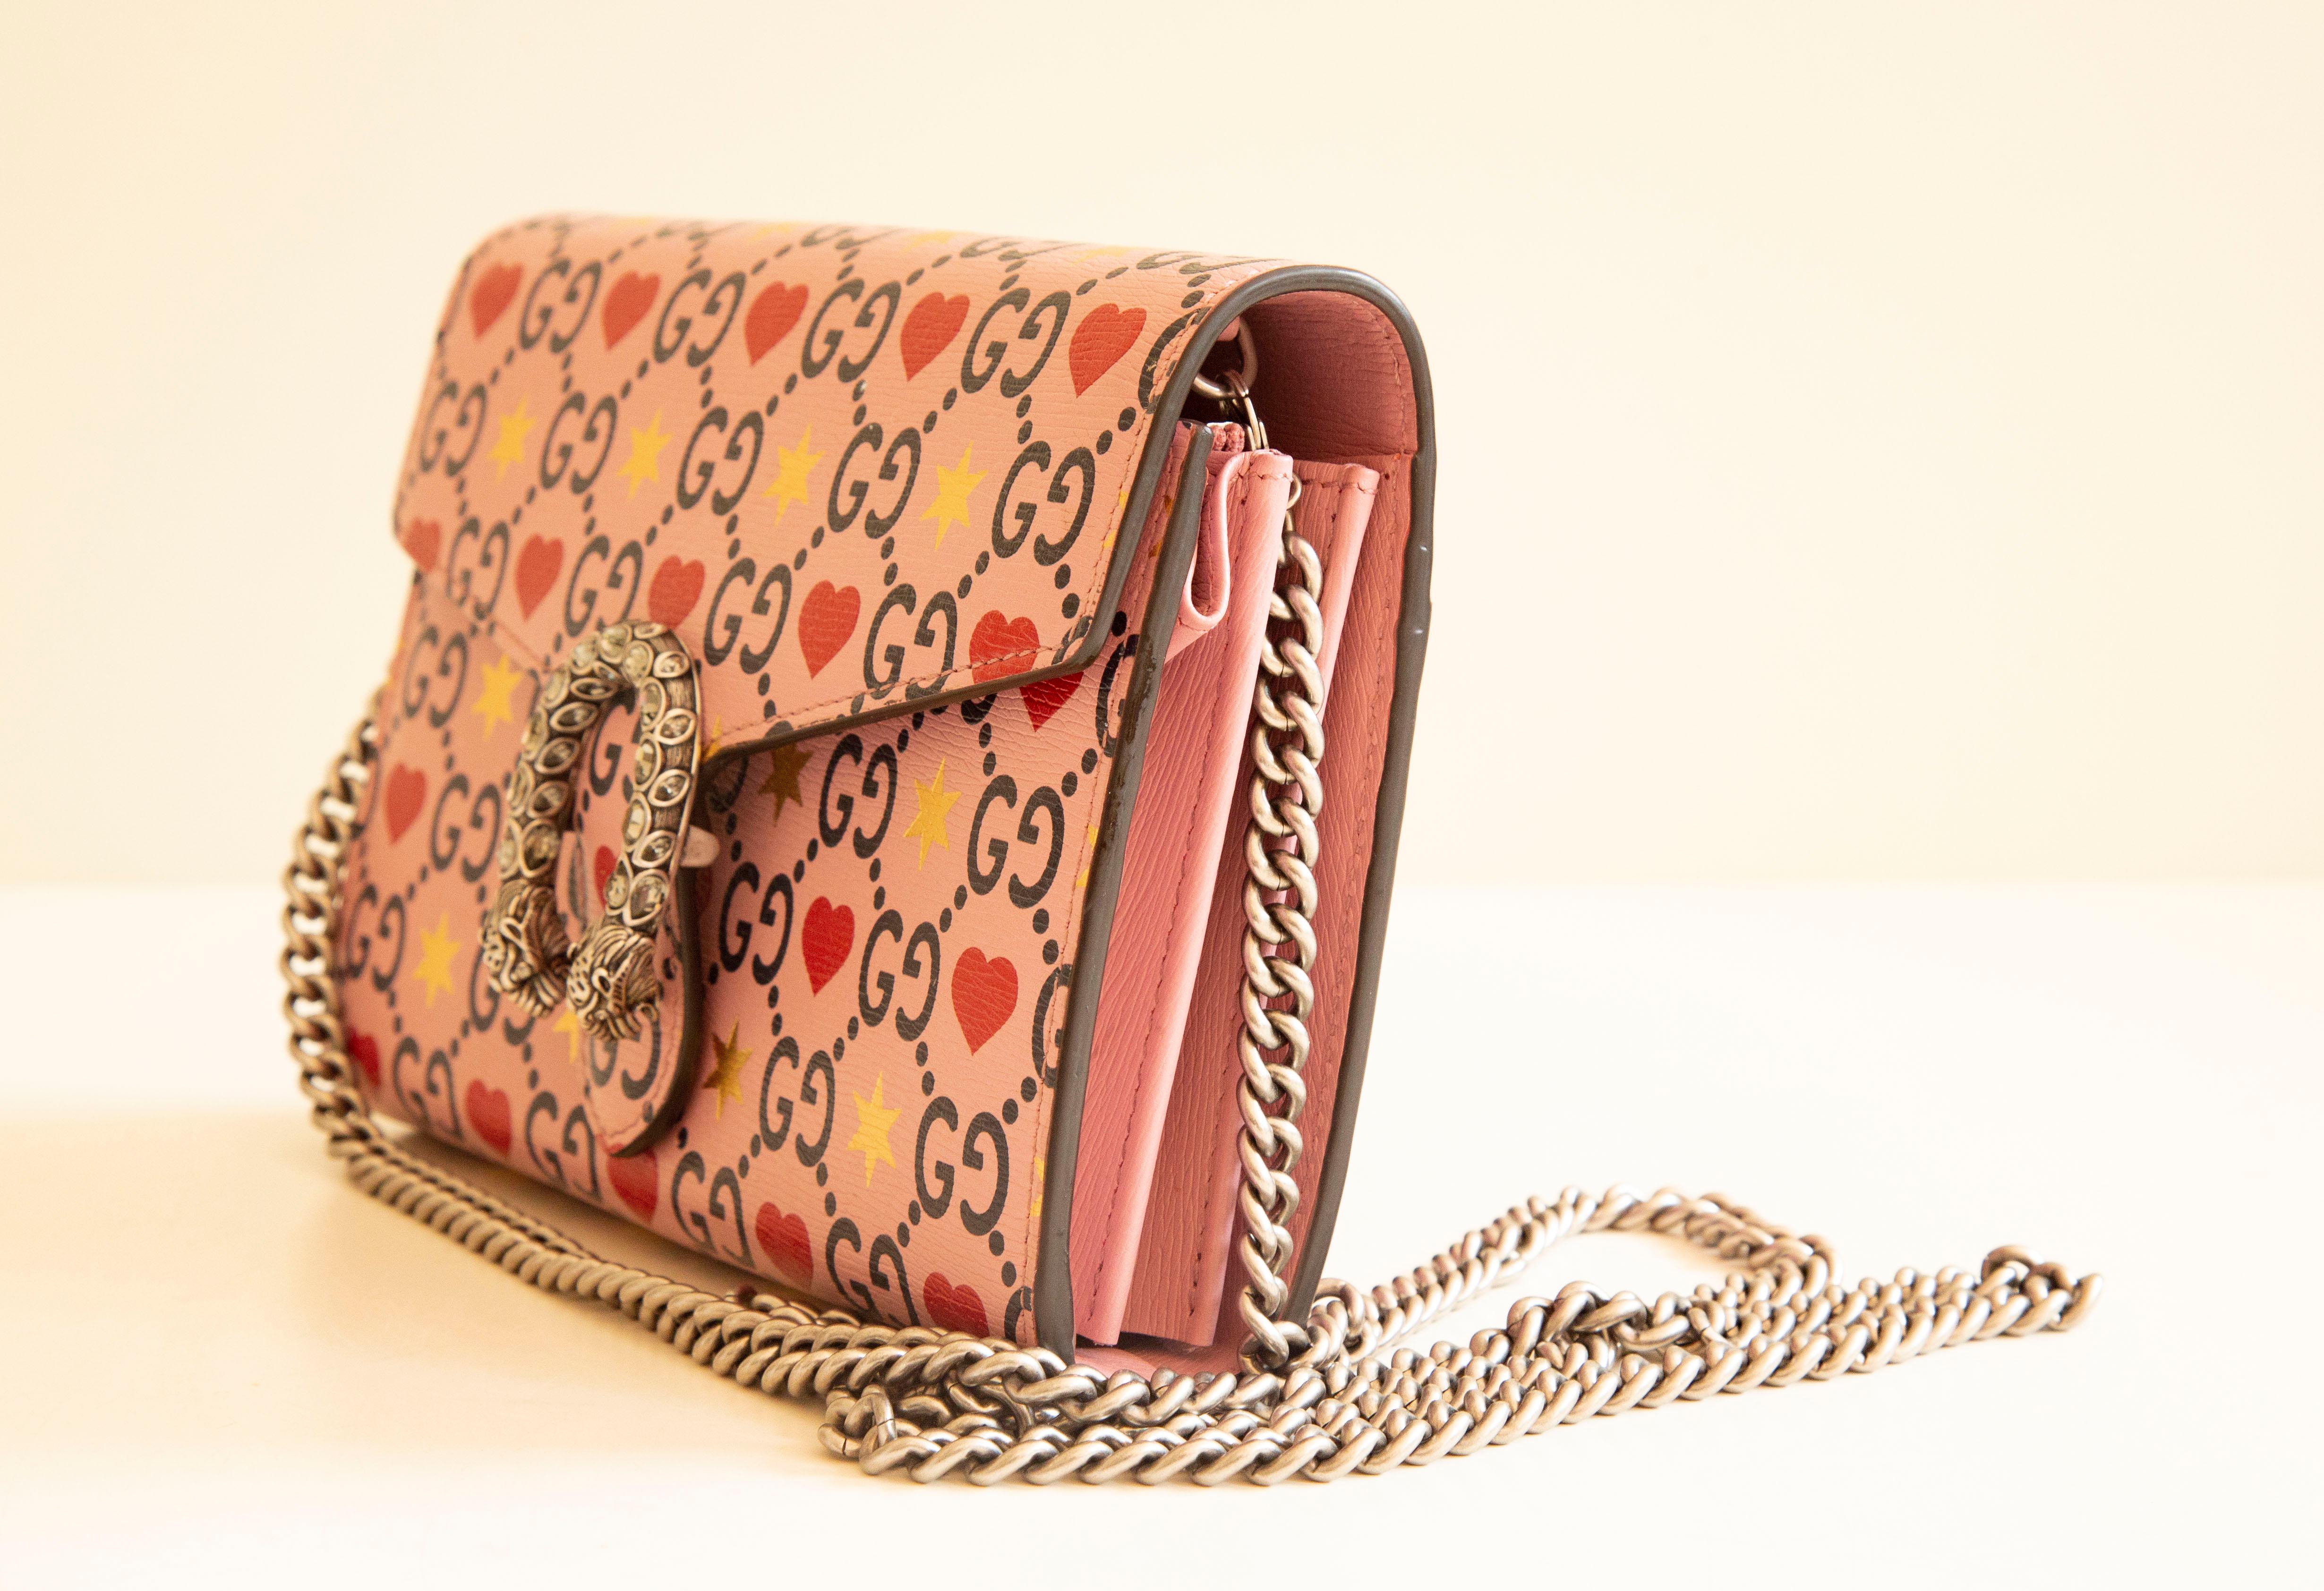 Gucci Dionizus Crossbody Bag Limited Edition Gucci Valentine's Day For Sale 1